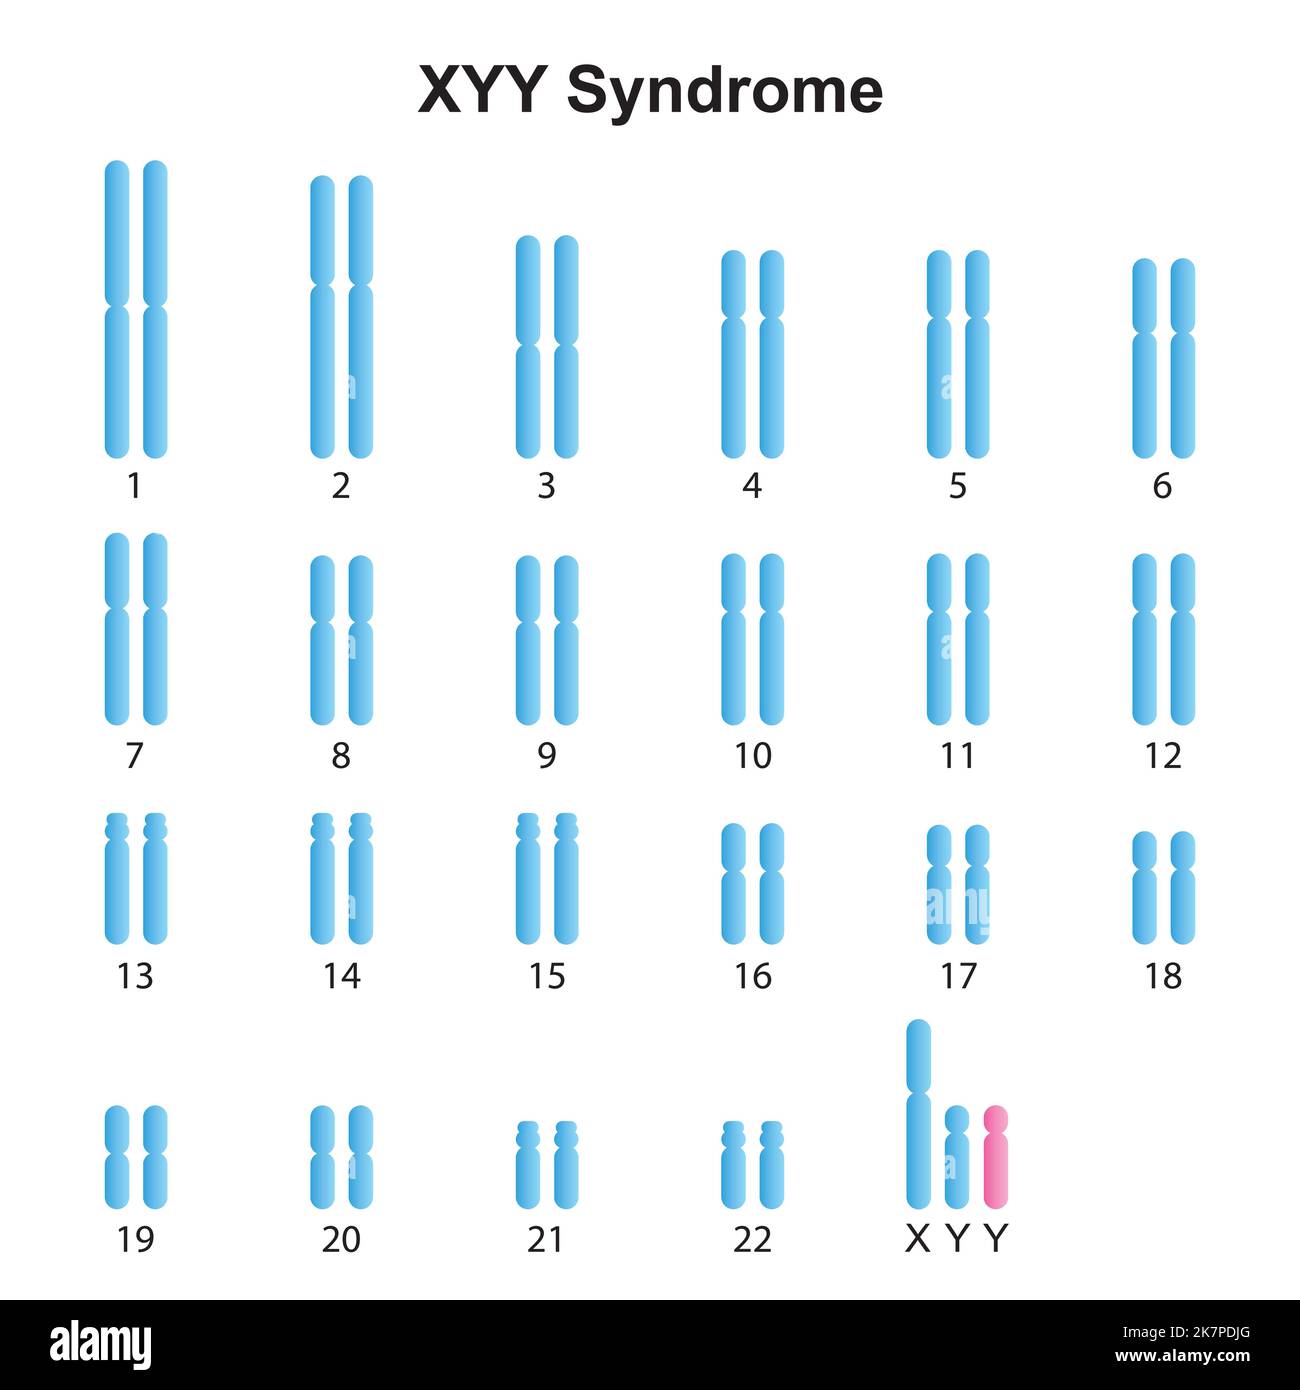 Scientific Designing Of Jacobs Syndrome Xyy Karyotype Colorful Symbols Vector Illustration 